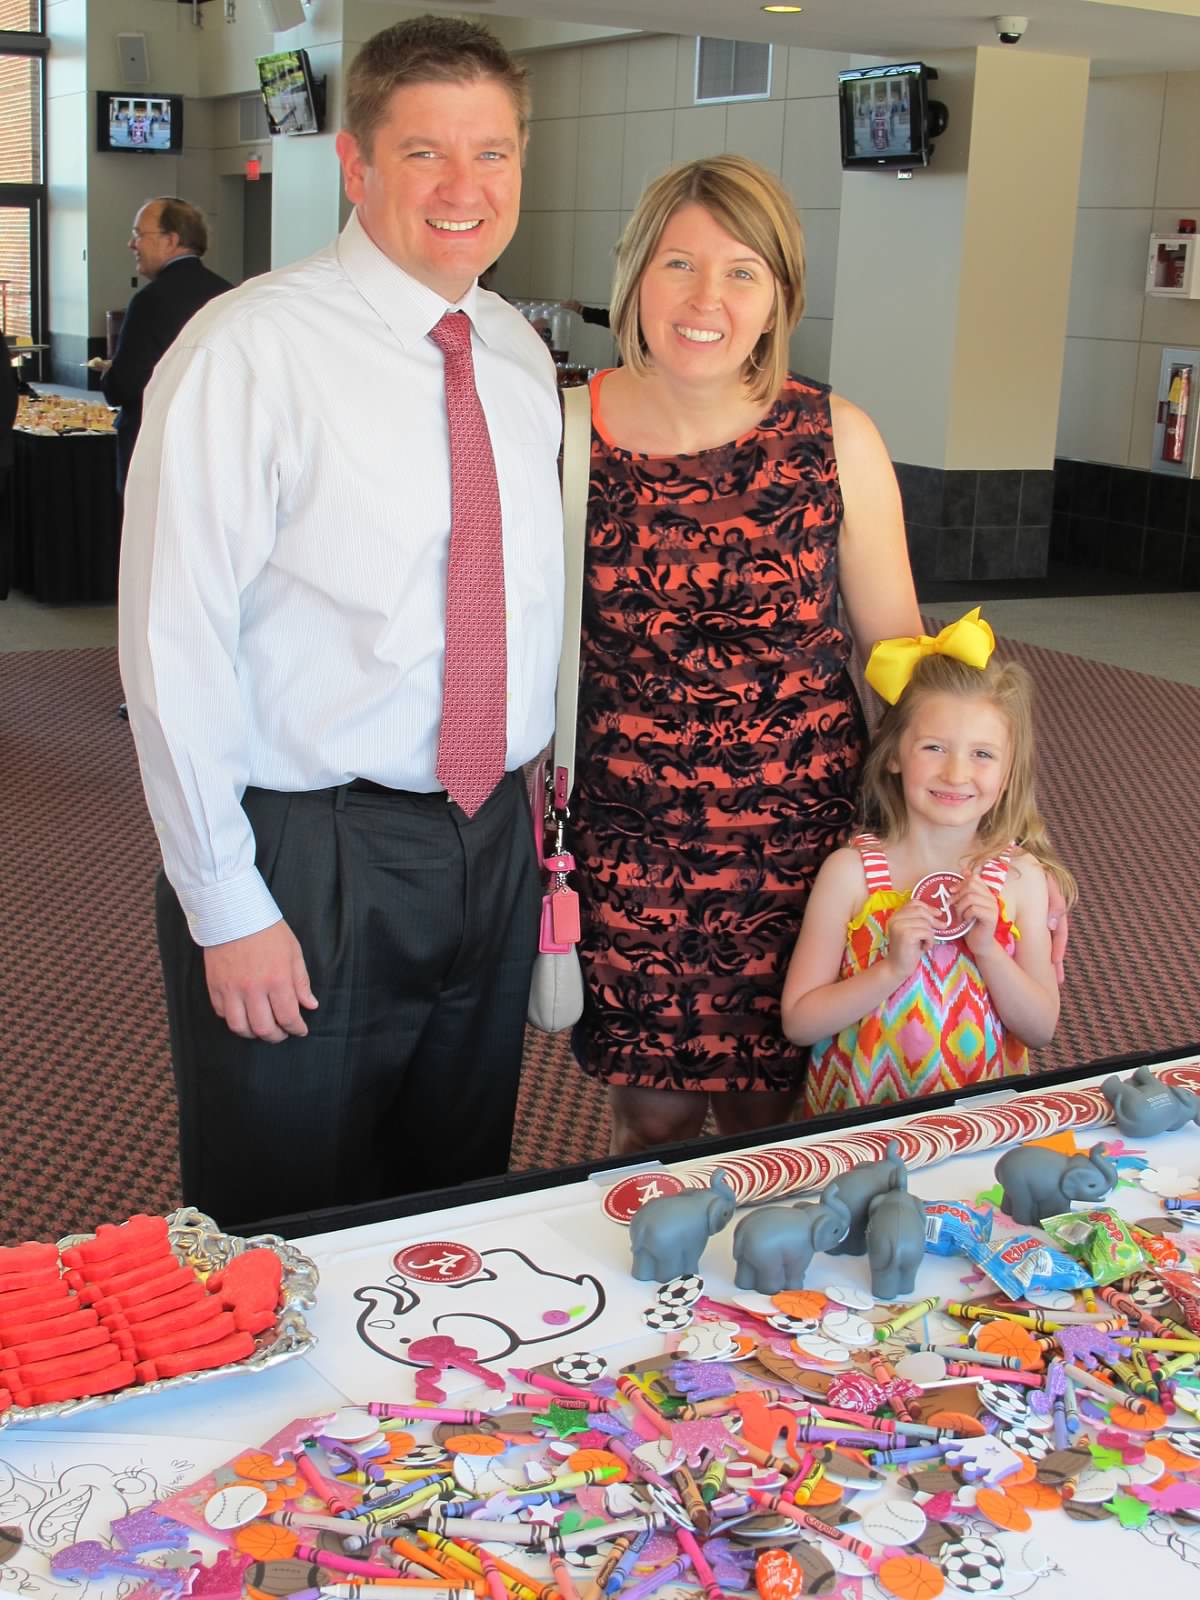 Children and adults alike enjoyed cookies, stickers, and coloring sheets on the Kid’s Table. 